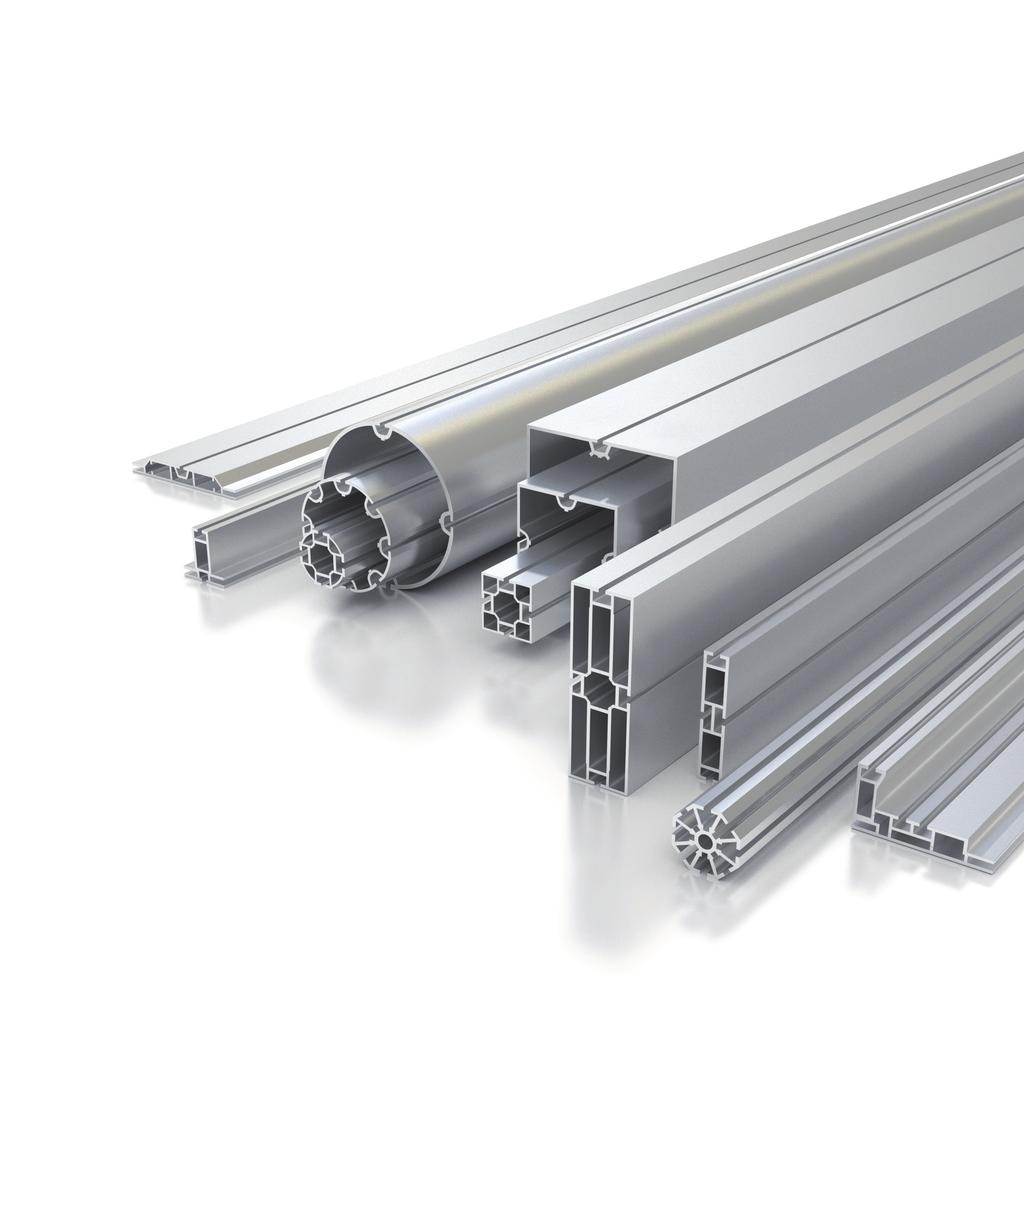 SHOW YOUR PROFILE WITH OCTANORM ALUMINIUM PROFILES Overview of OCTANORM's extensive collection of extrusions.